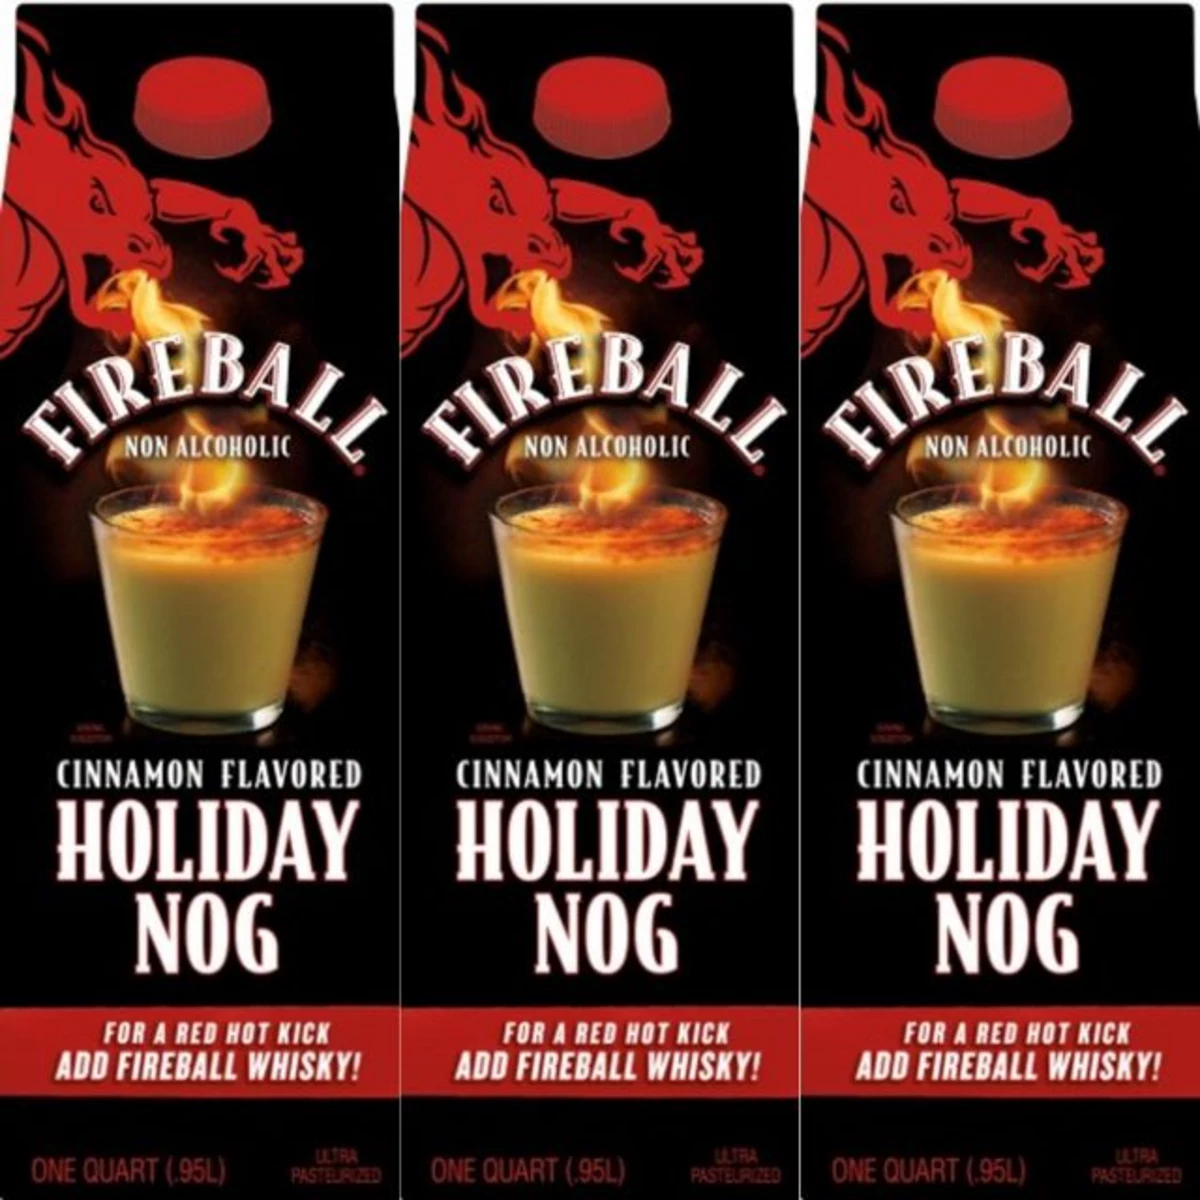 We Have Questions About This New 'Fireball Holiday Nog'